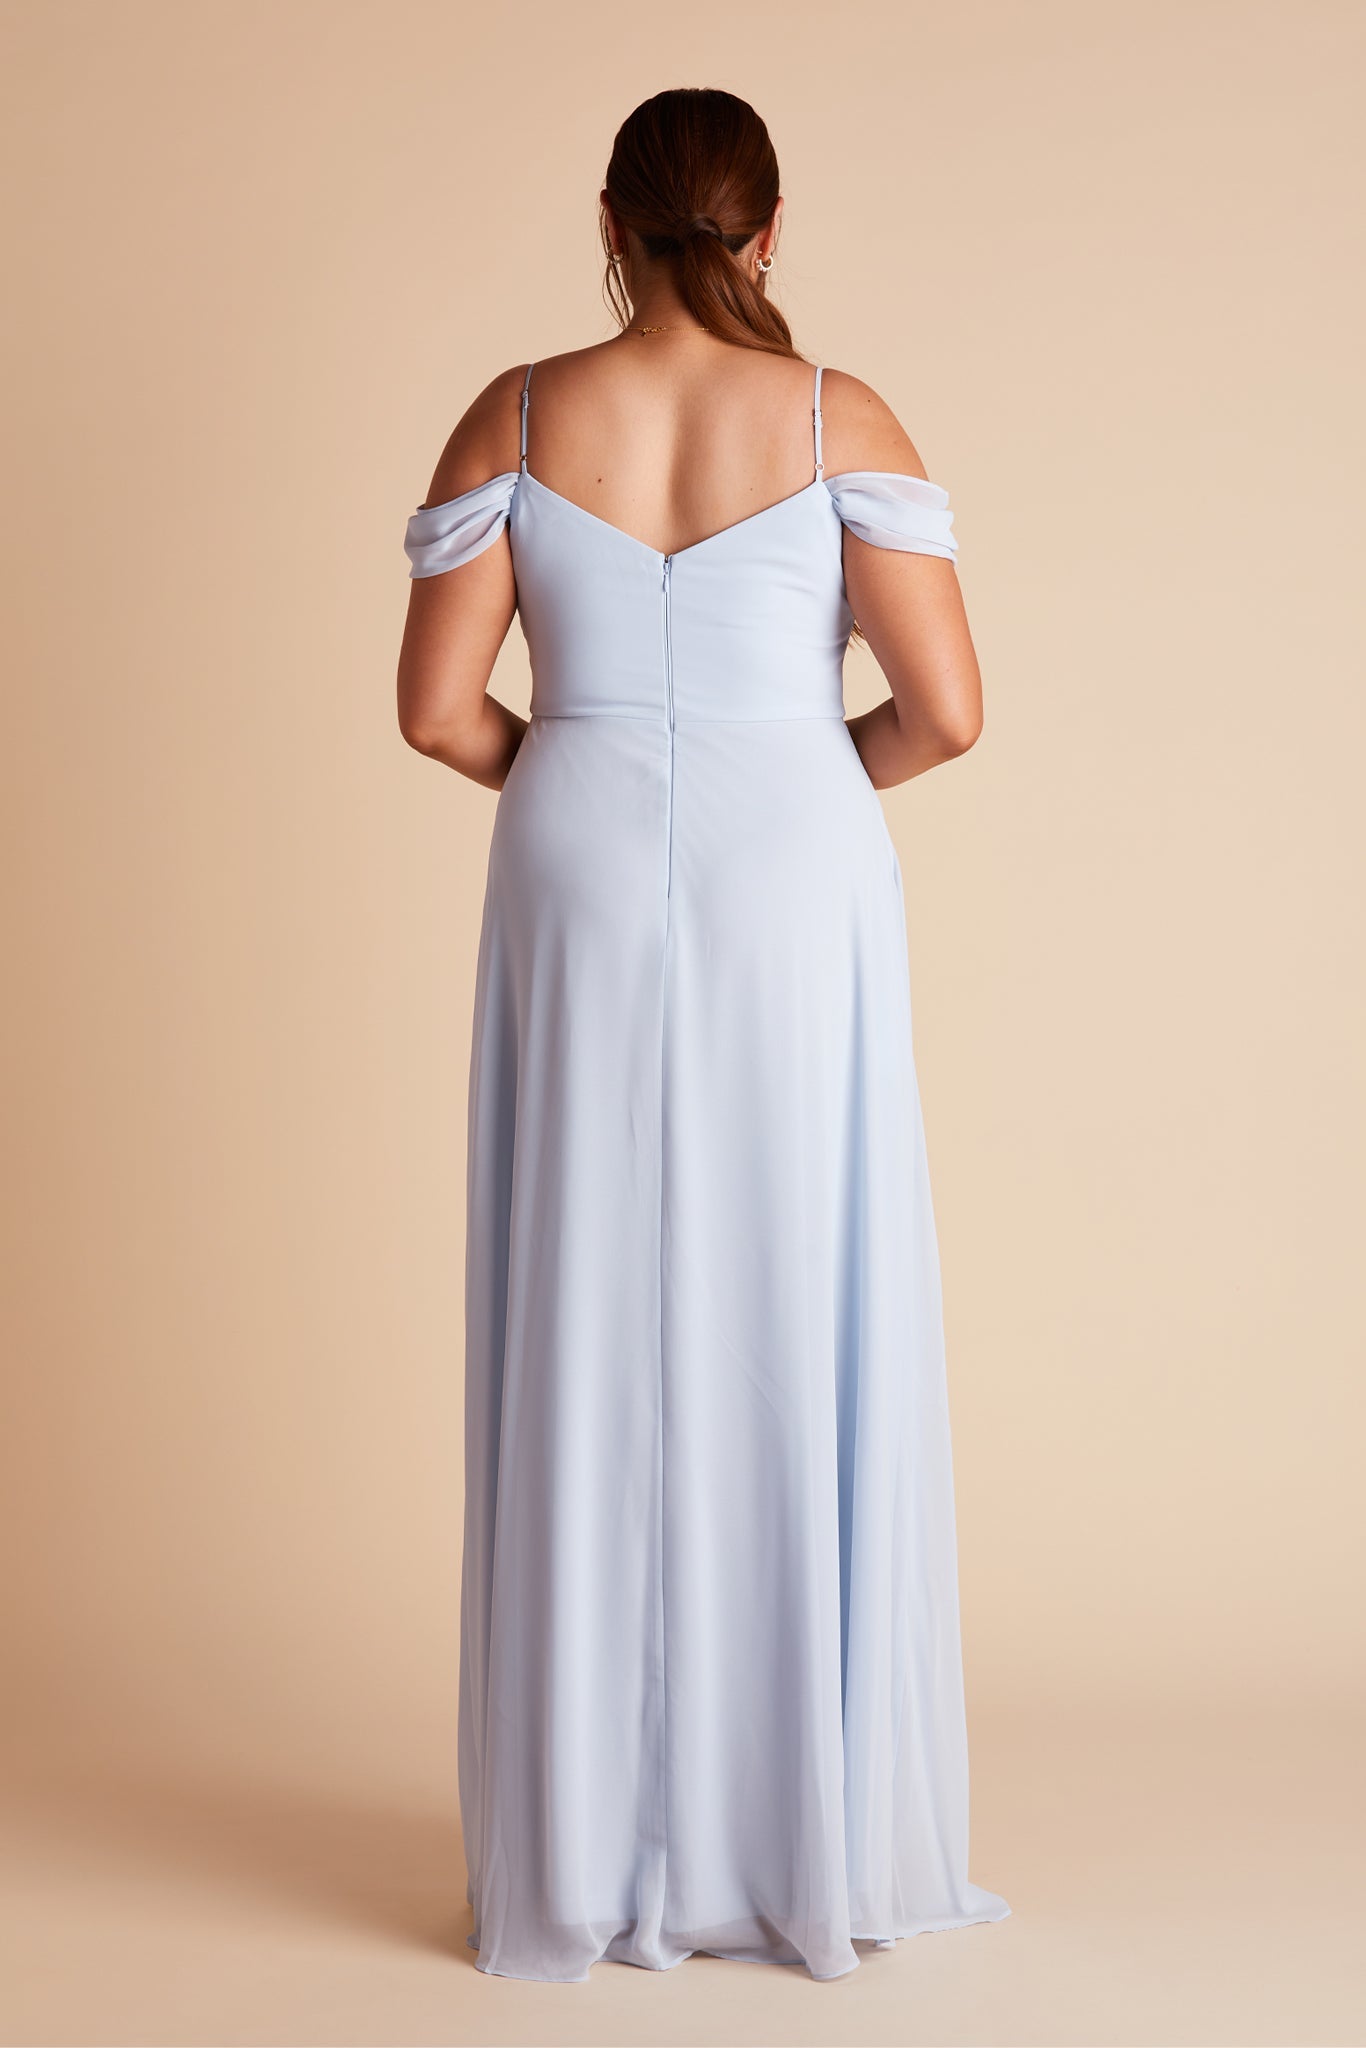 Devin convertible plus size bridesmaid dress with slit in ice blue chiffon by Birdy Grey, back view